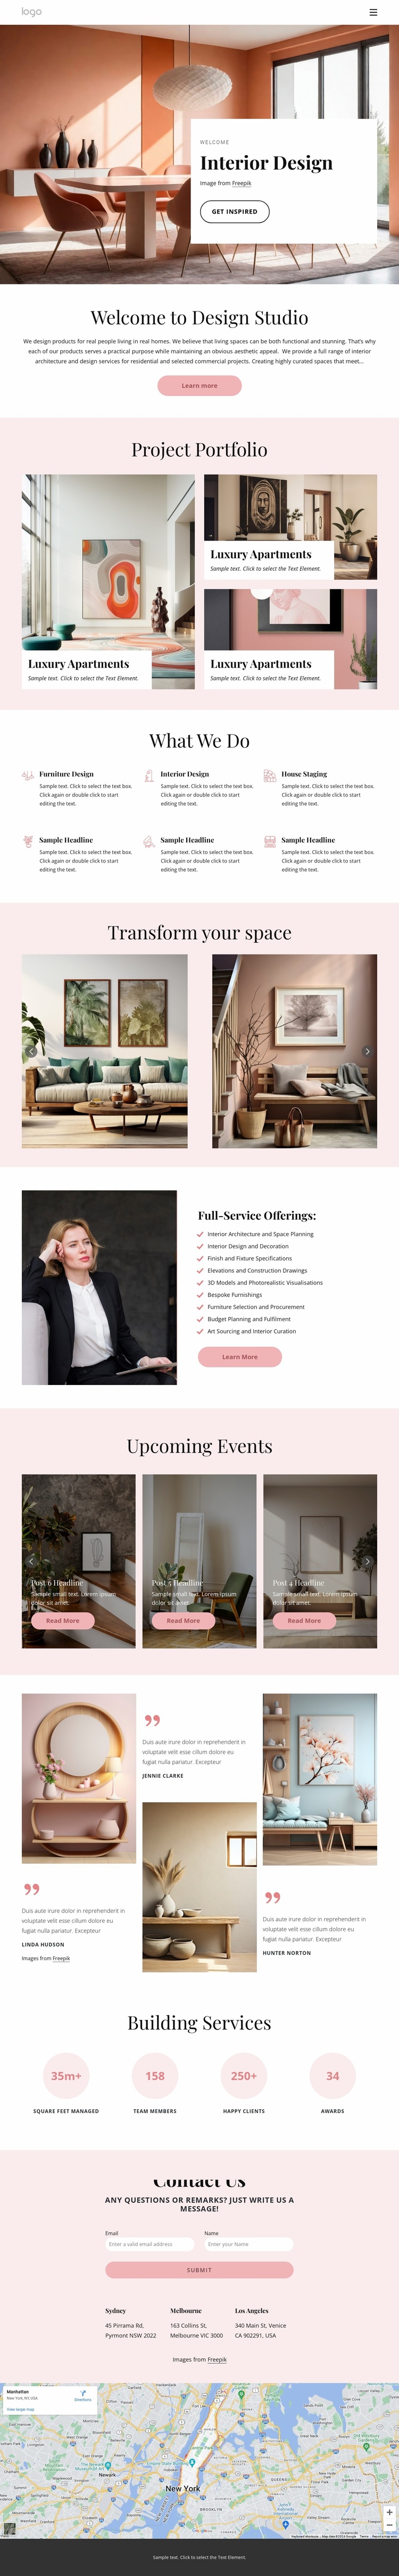 The interior design firm Landing Page